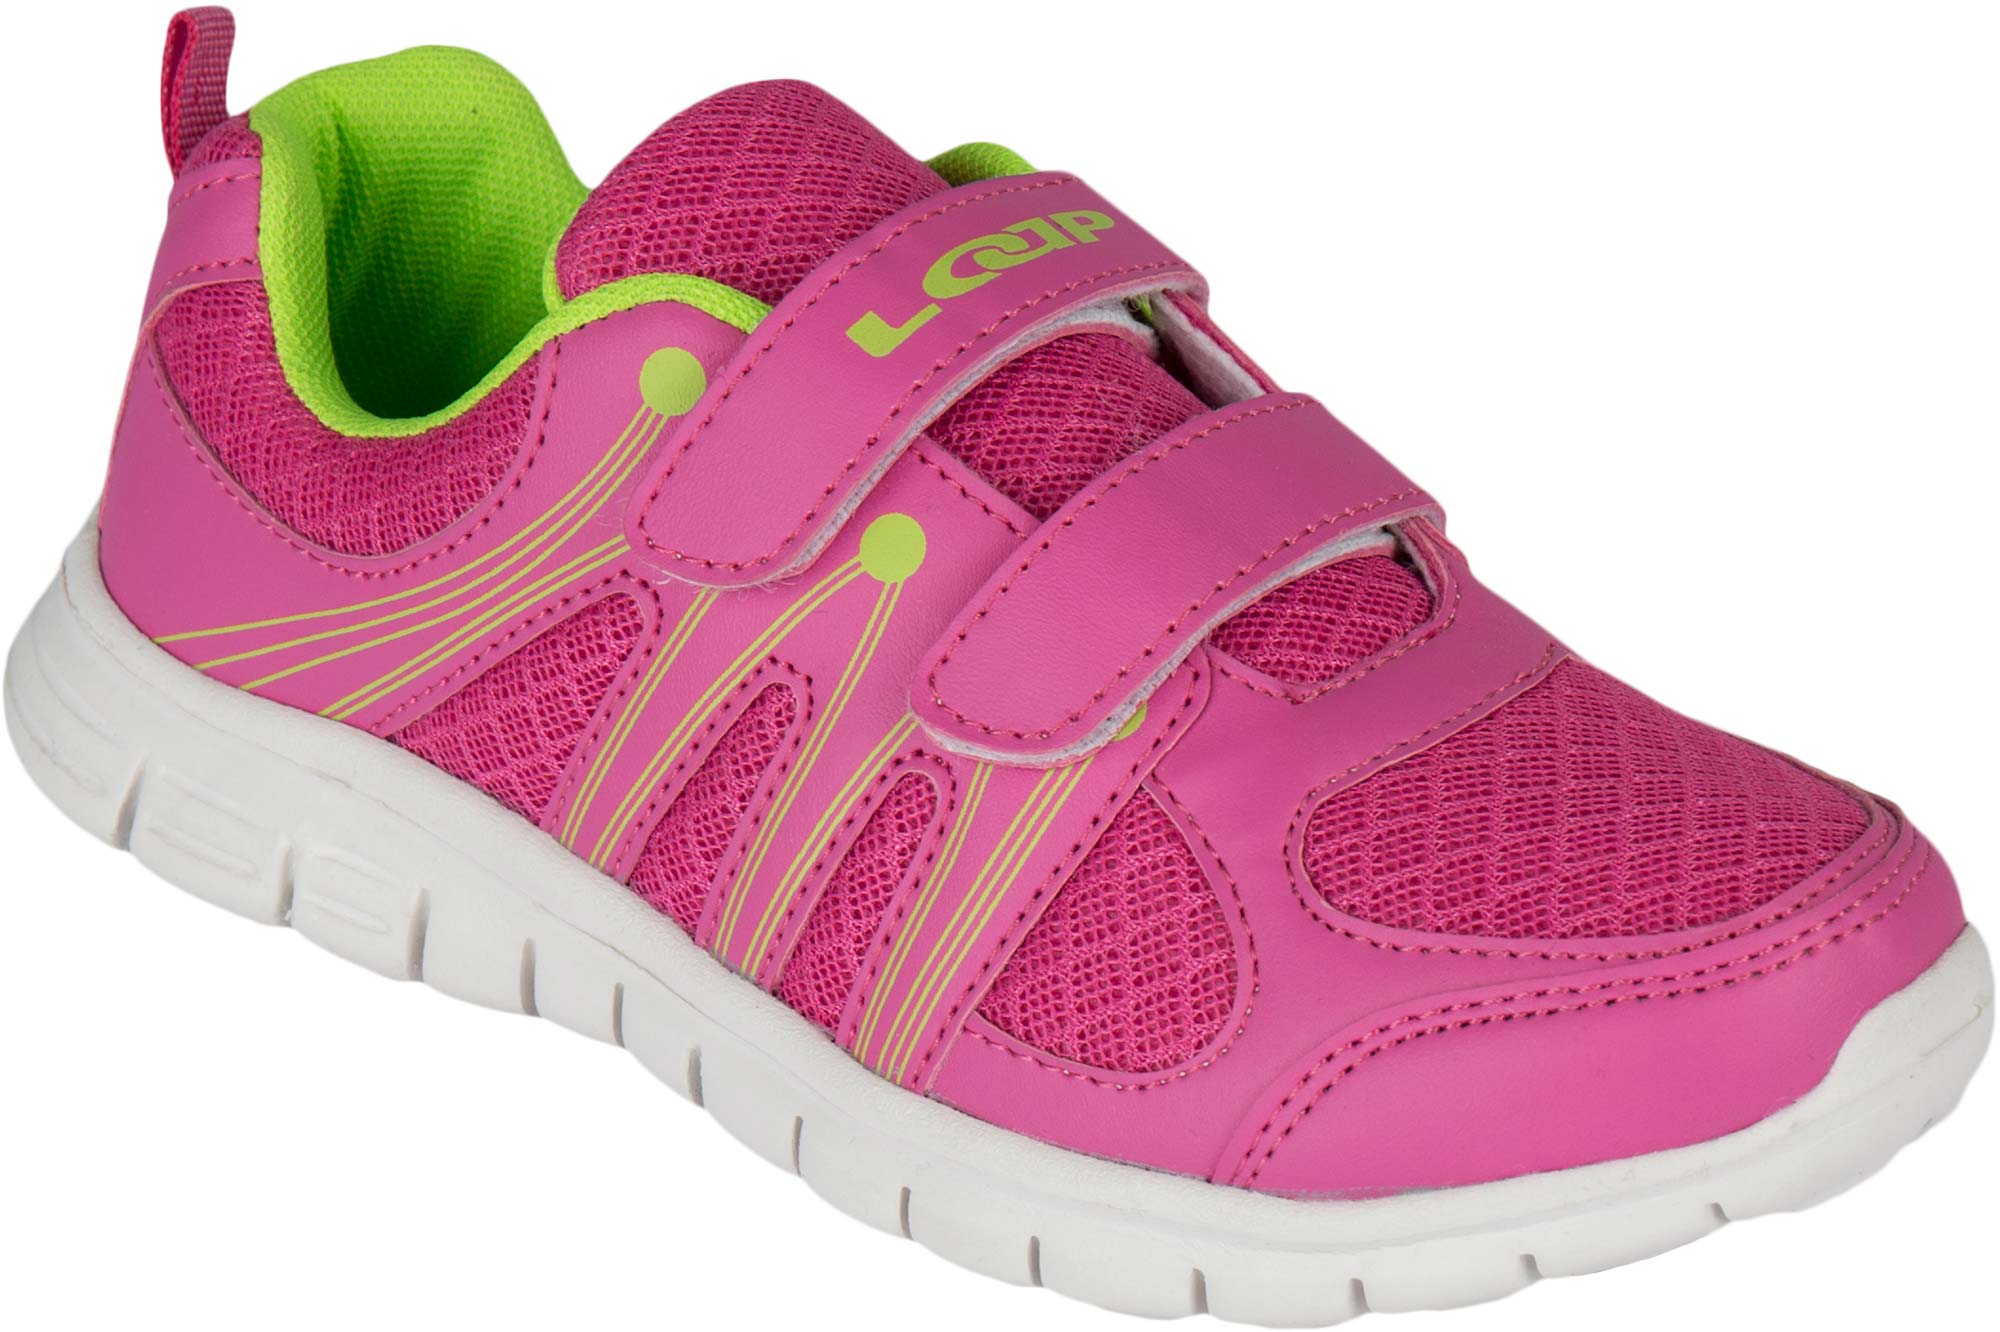 Girls leisure shoes